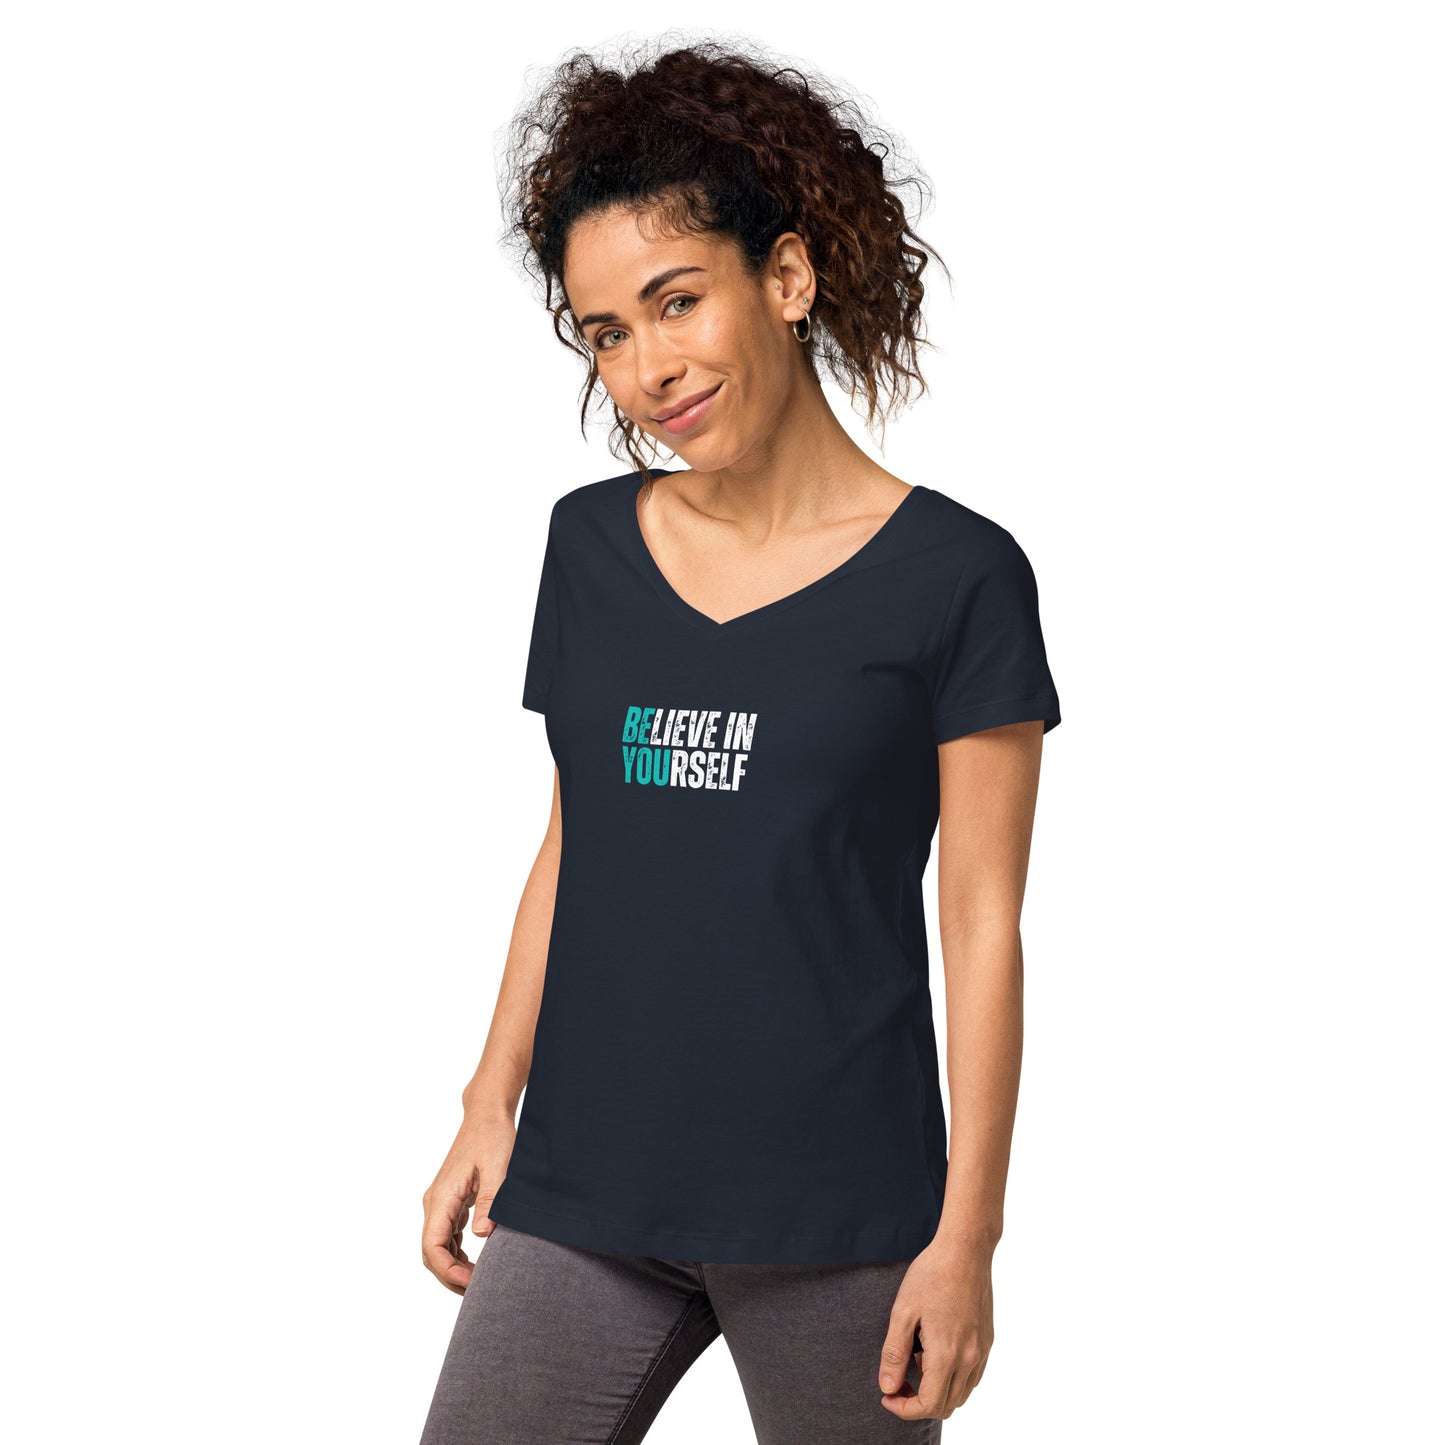 BElieve in YOUrself - Women’s fitted v-neck t-shirt